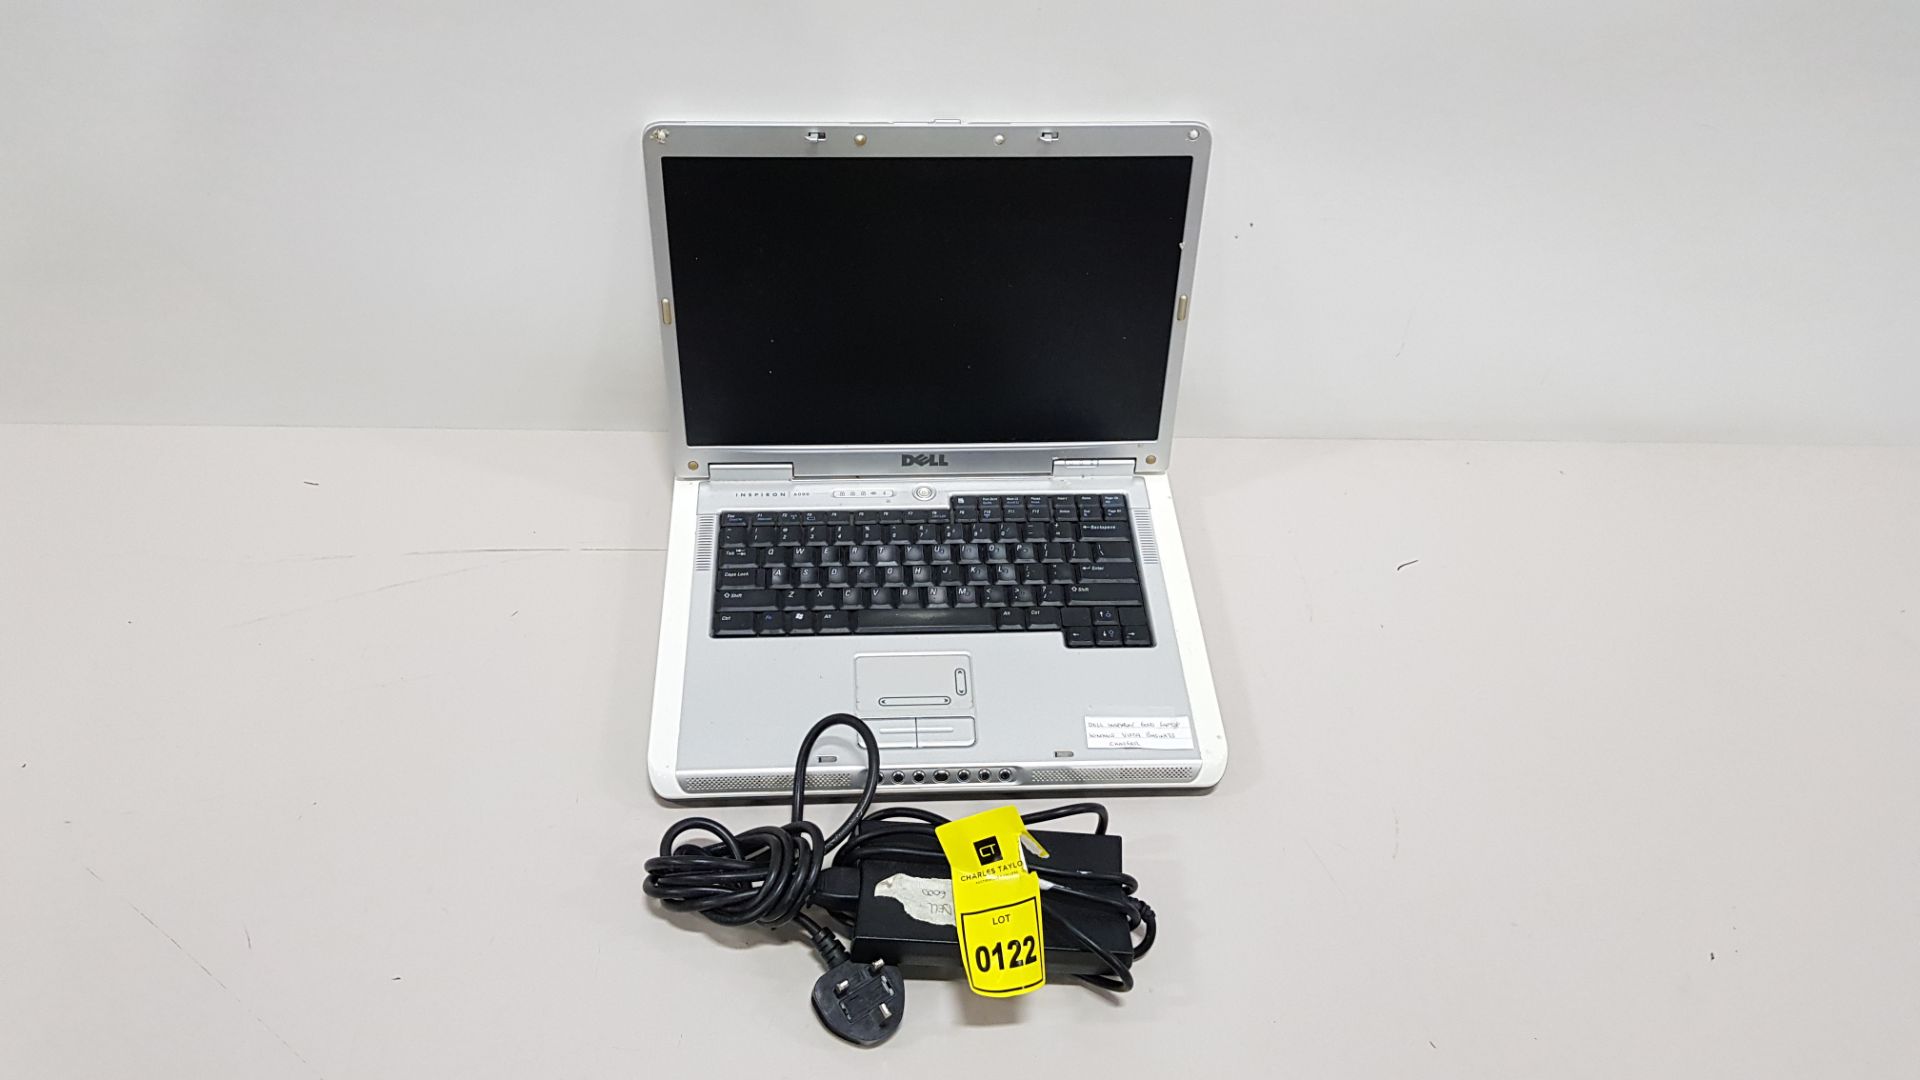 DELL INSPIRON 6000 LAPTOP WINDOWS VISTA BUSINESS - WITH CHARGER